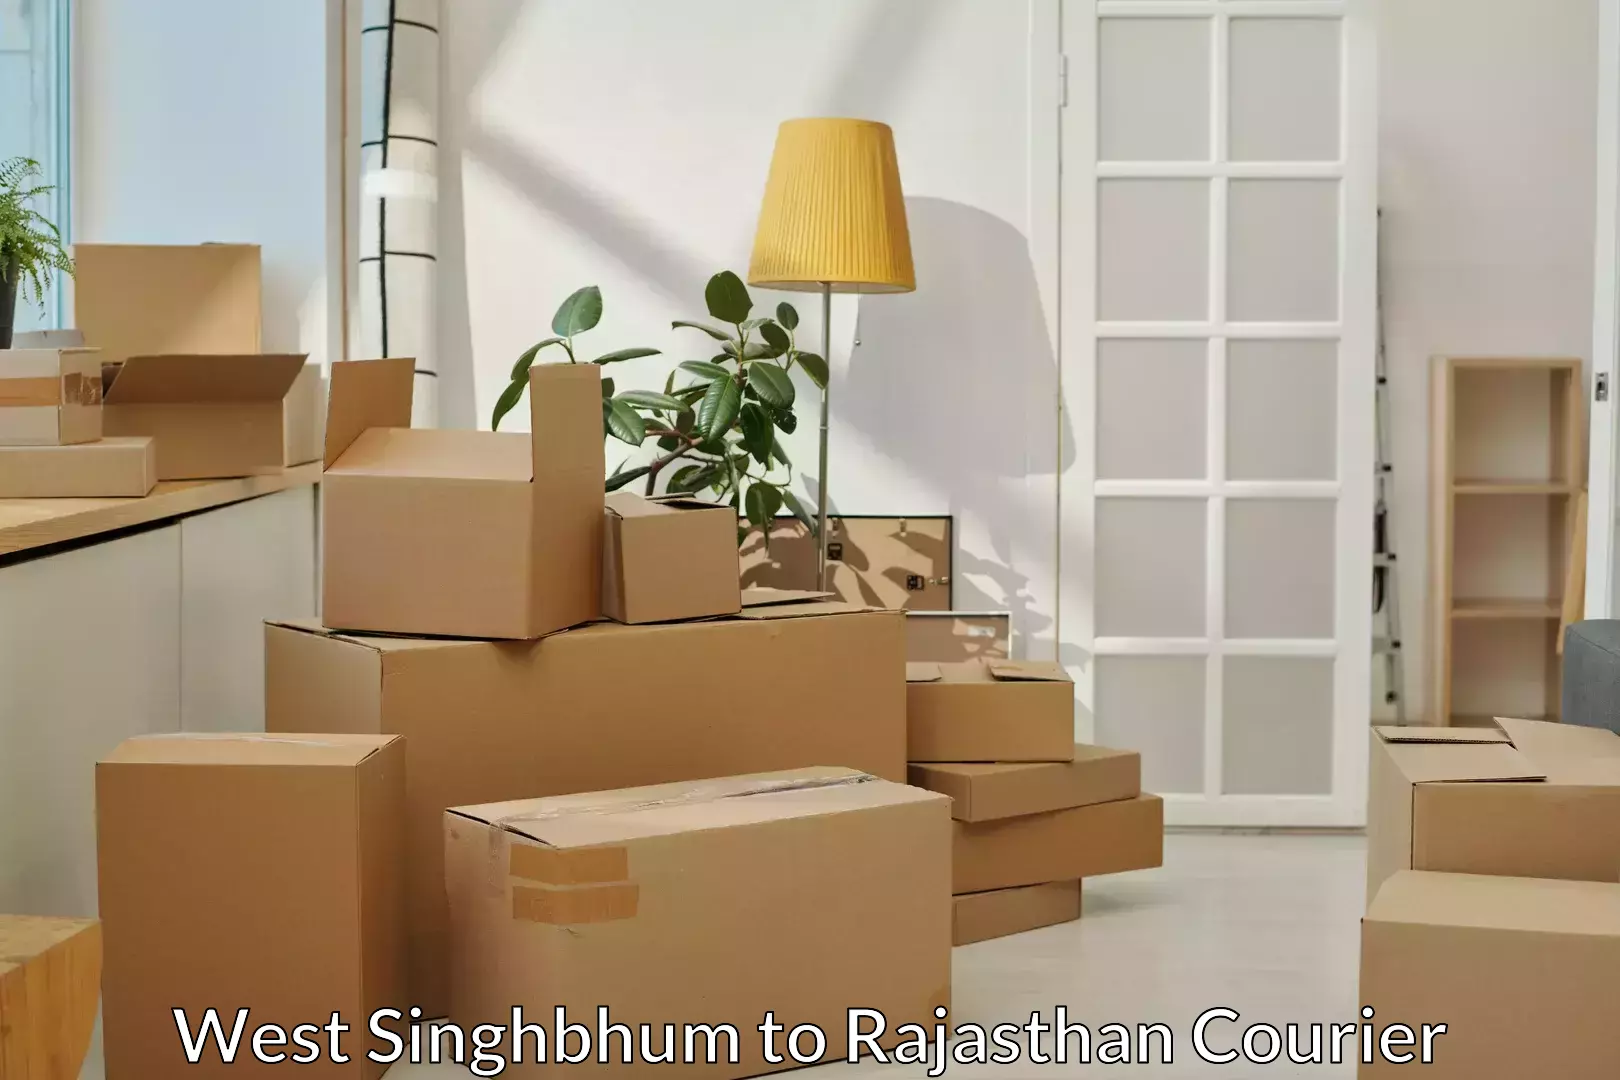 Furniture moving experts West Singhbhum to Didwana